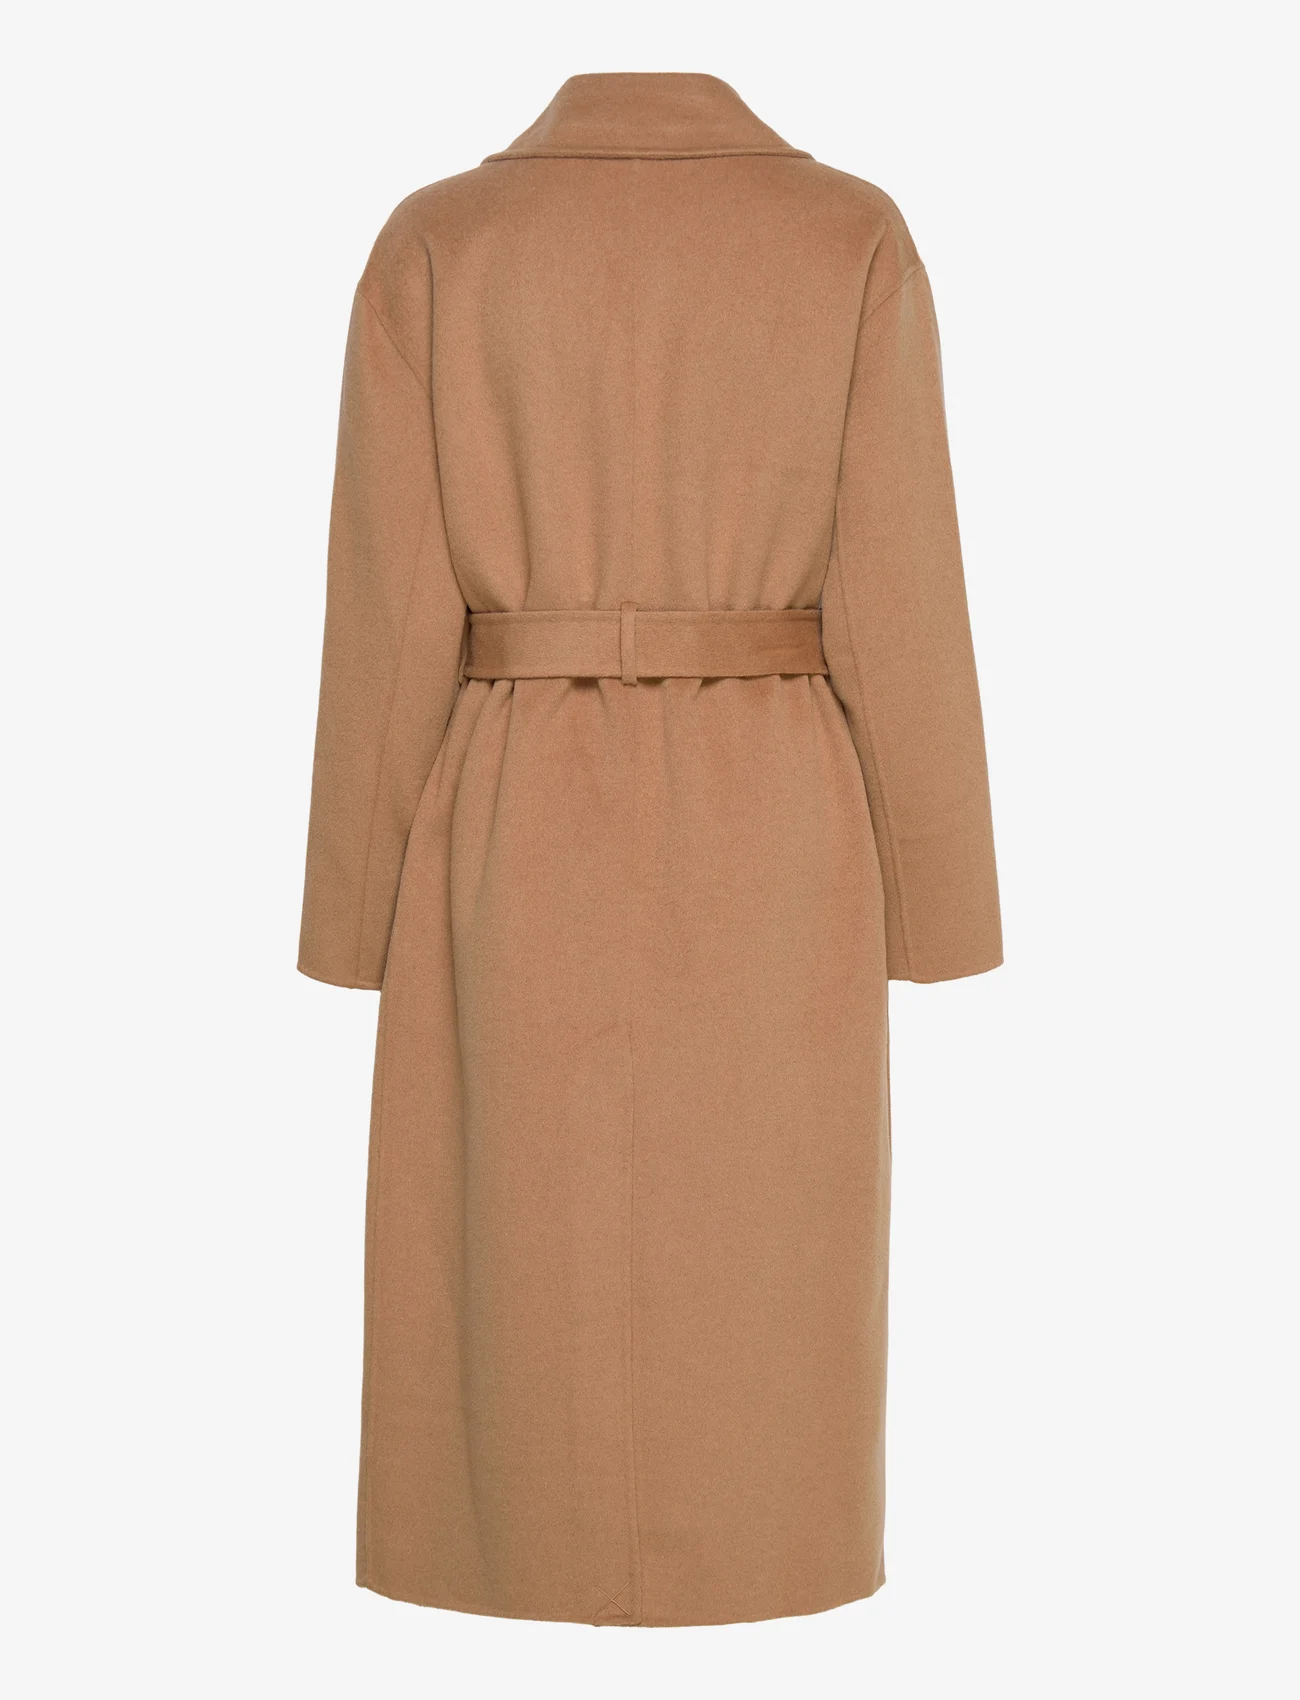 Michael Kors Doubleface Robe Coat  €. Buy Winter Coats from Michael  Kors online at . Fast delivery and easy returns